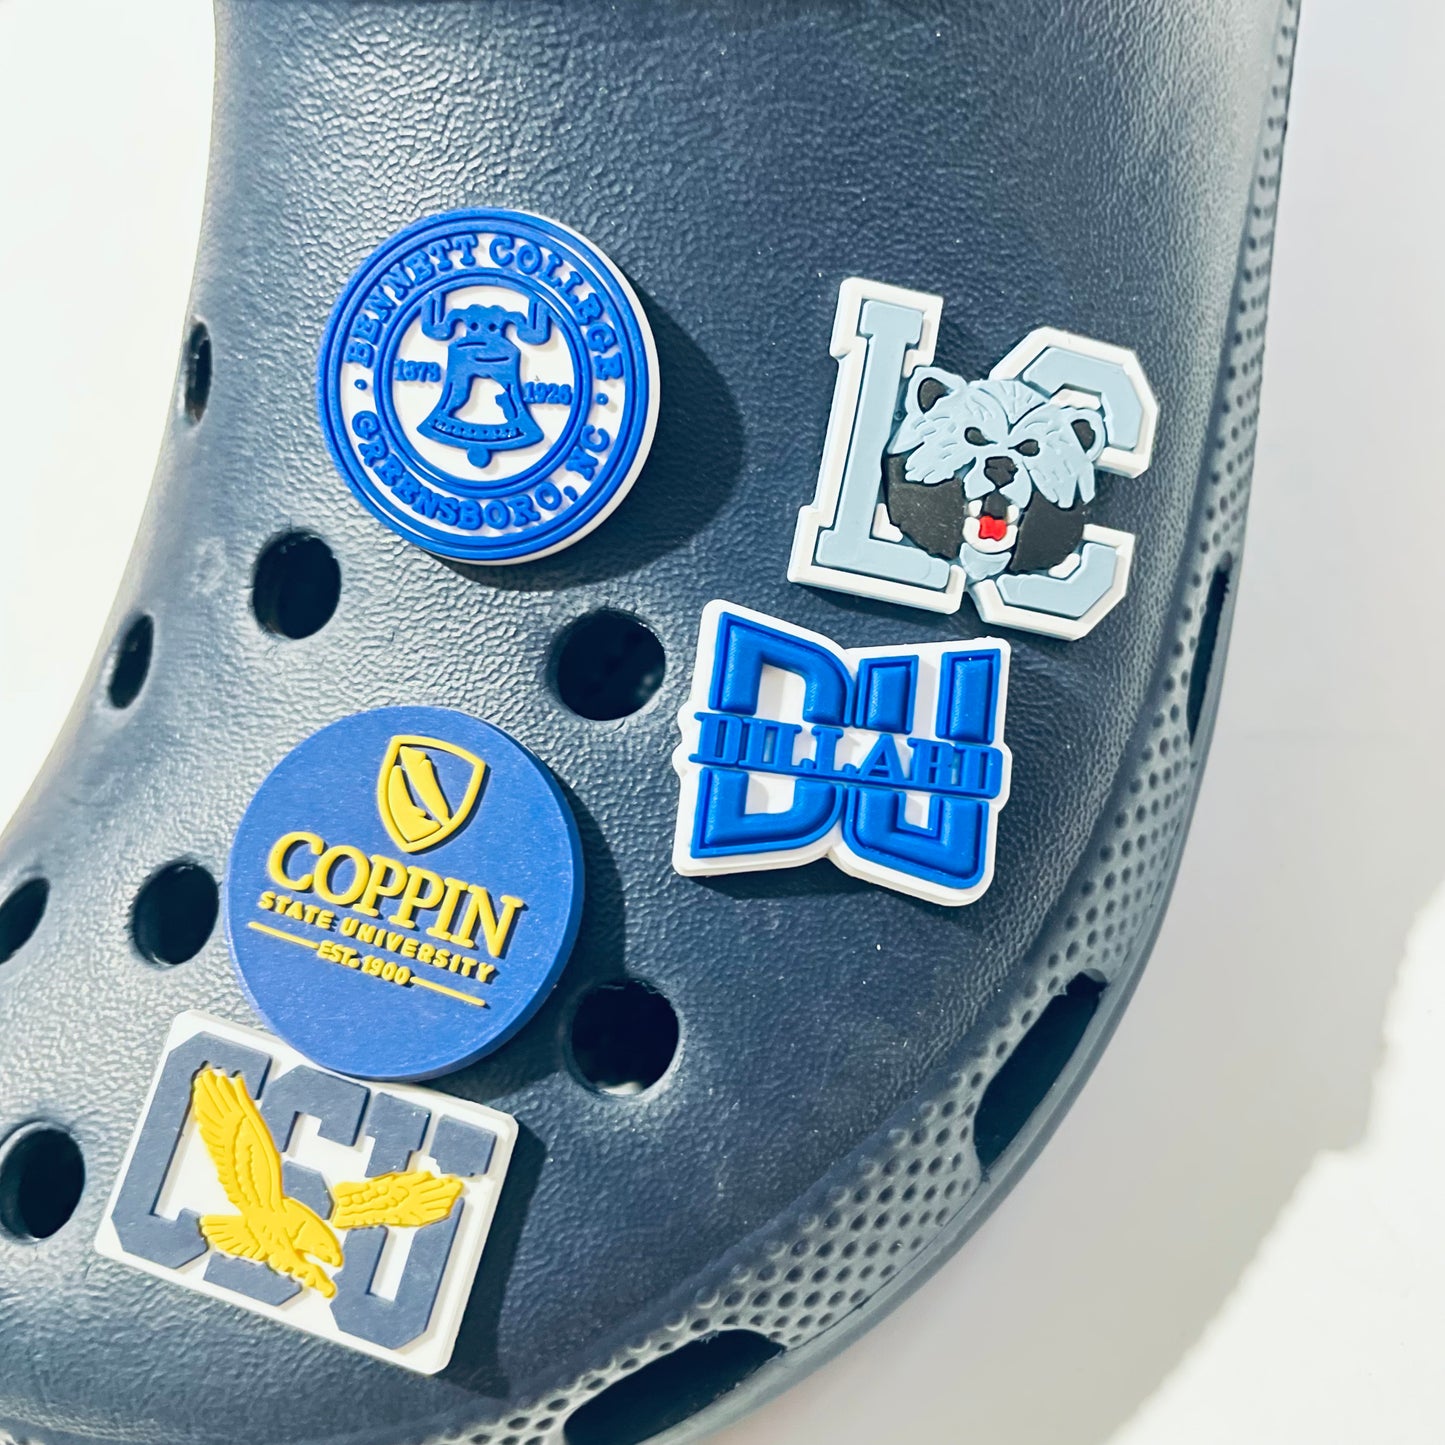 HBCU Shoe Charm - Alabama, Coppin, Dillard,  Fort Valley, Jackson State, Southern, Tennessee